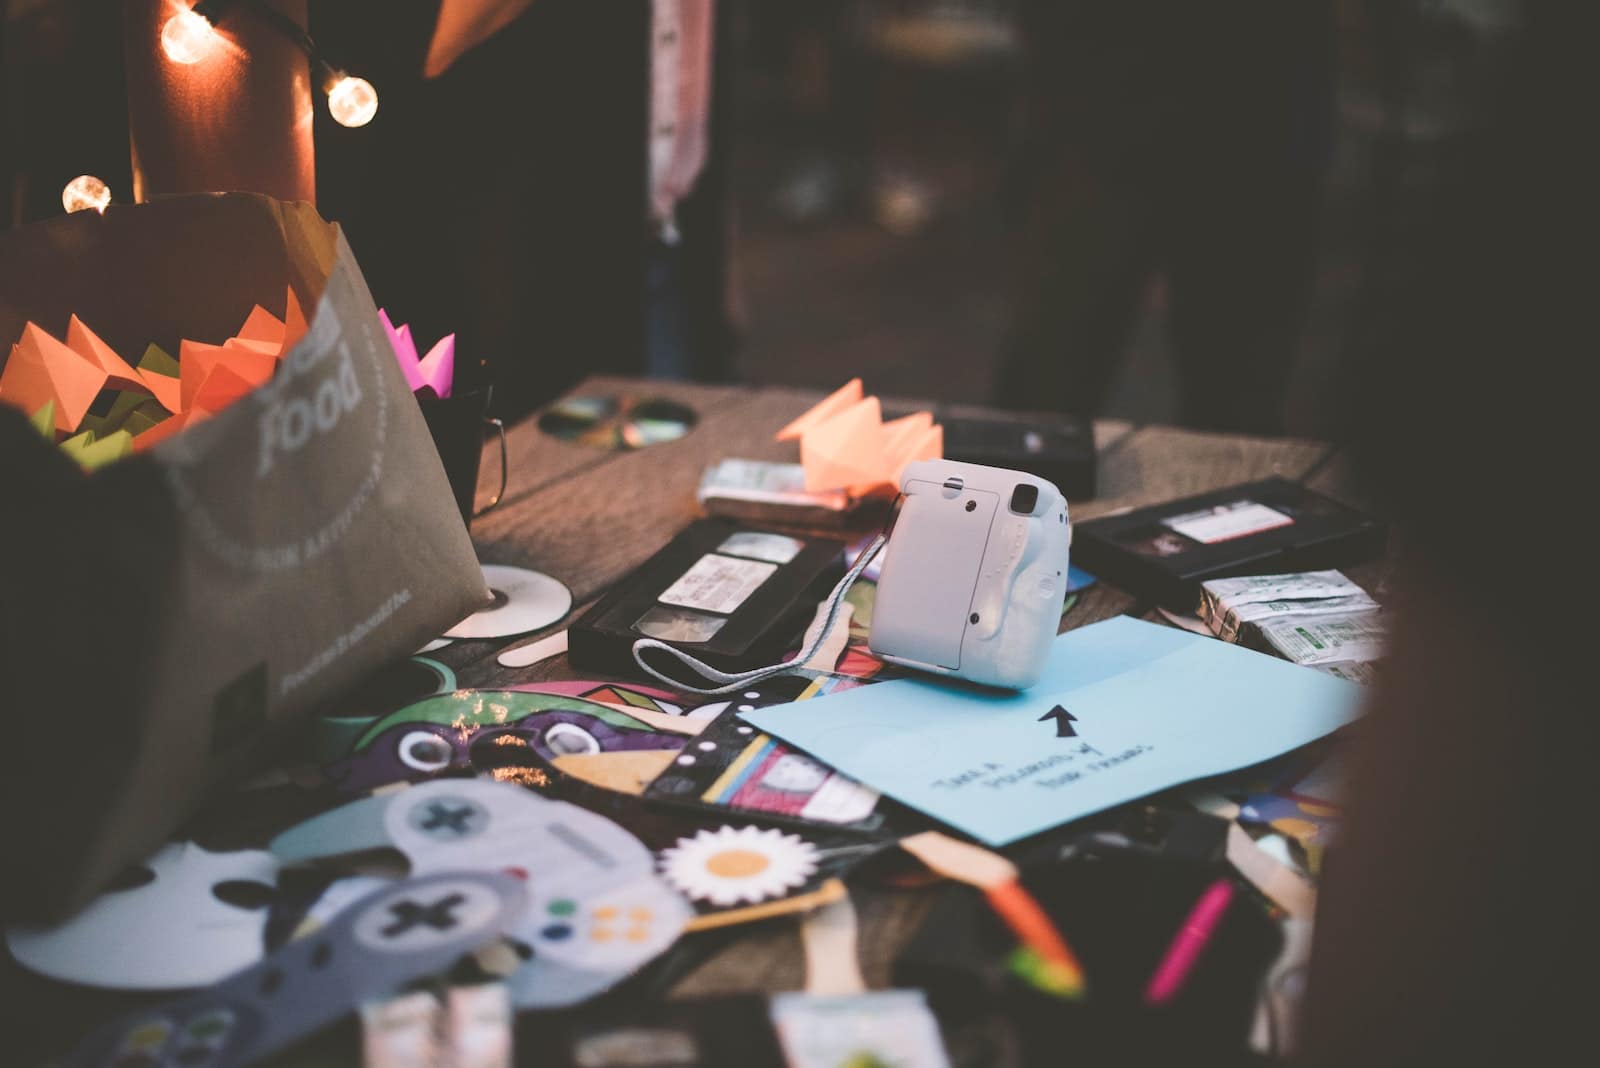 10 Signs You Have Too Much Stuff